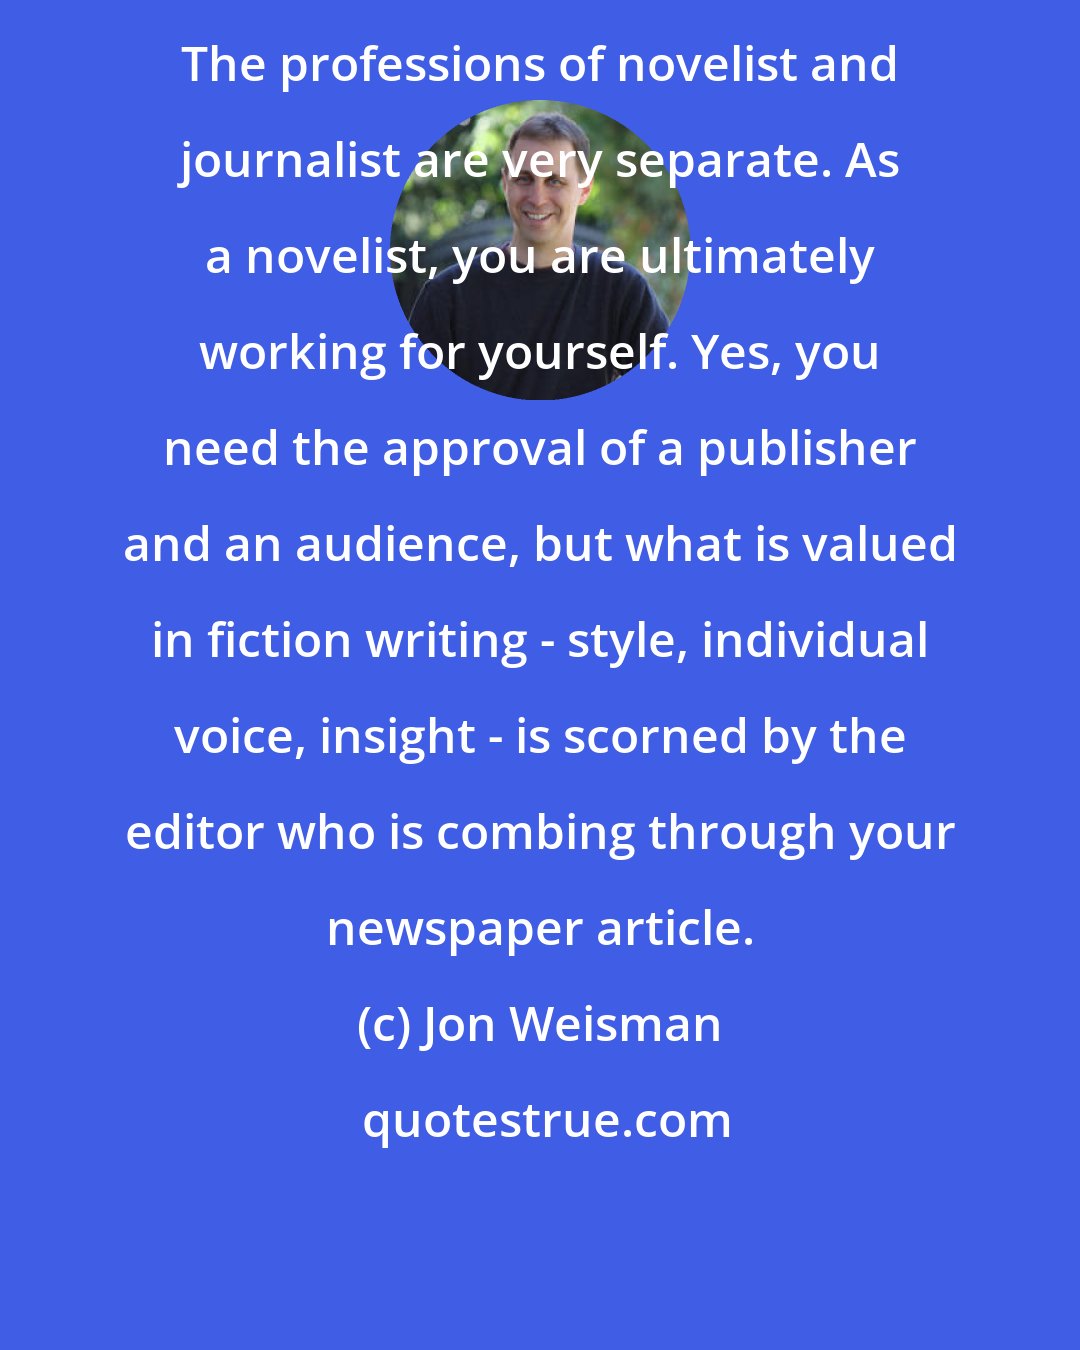 Jon Weisman: The professions of novelist and journalist are very separate. As a novelist, you are ultimately working for yourself. Yes, you need the approval of a publisher and an audience, but what is valued in fiction writing - style, individual voice, insight - is scorned by the editor who is combing through your newspaper article.